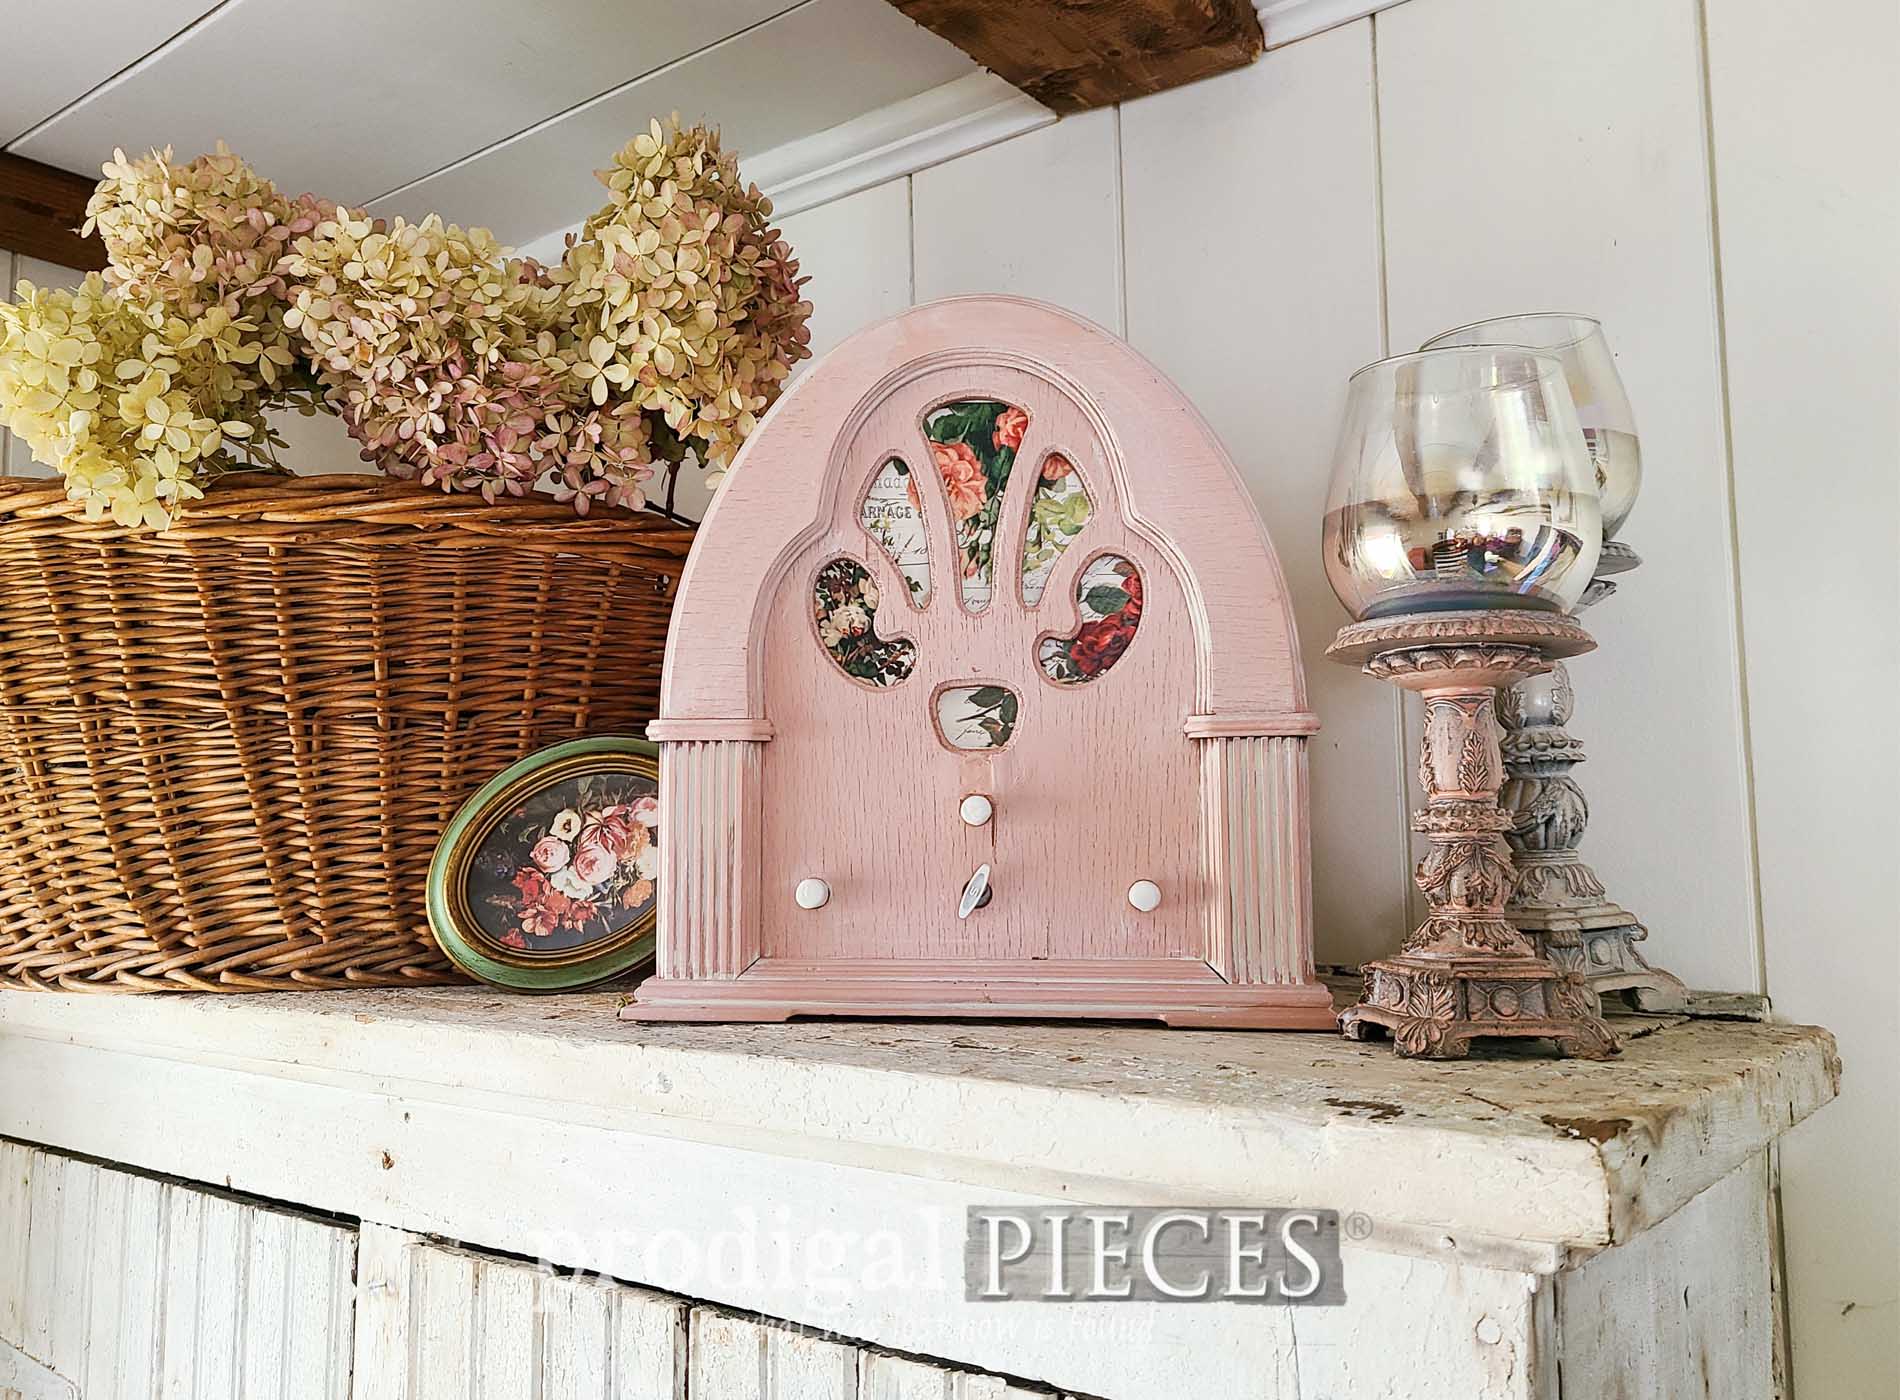 Featured Upcycled Antique Radio by Larissa of Prodigal Pieces | prodigalpieces.com #prodigalpieces #upcycled #diy #repurposed